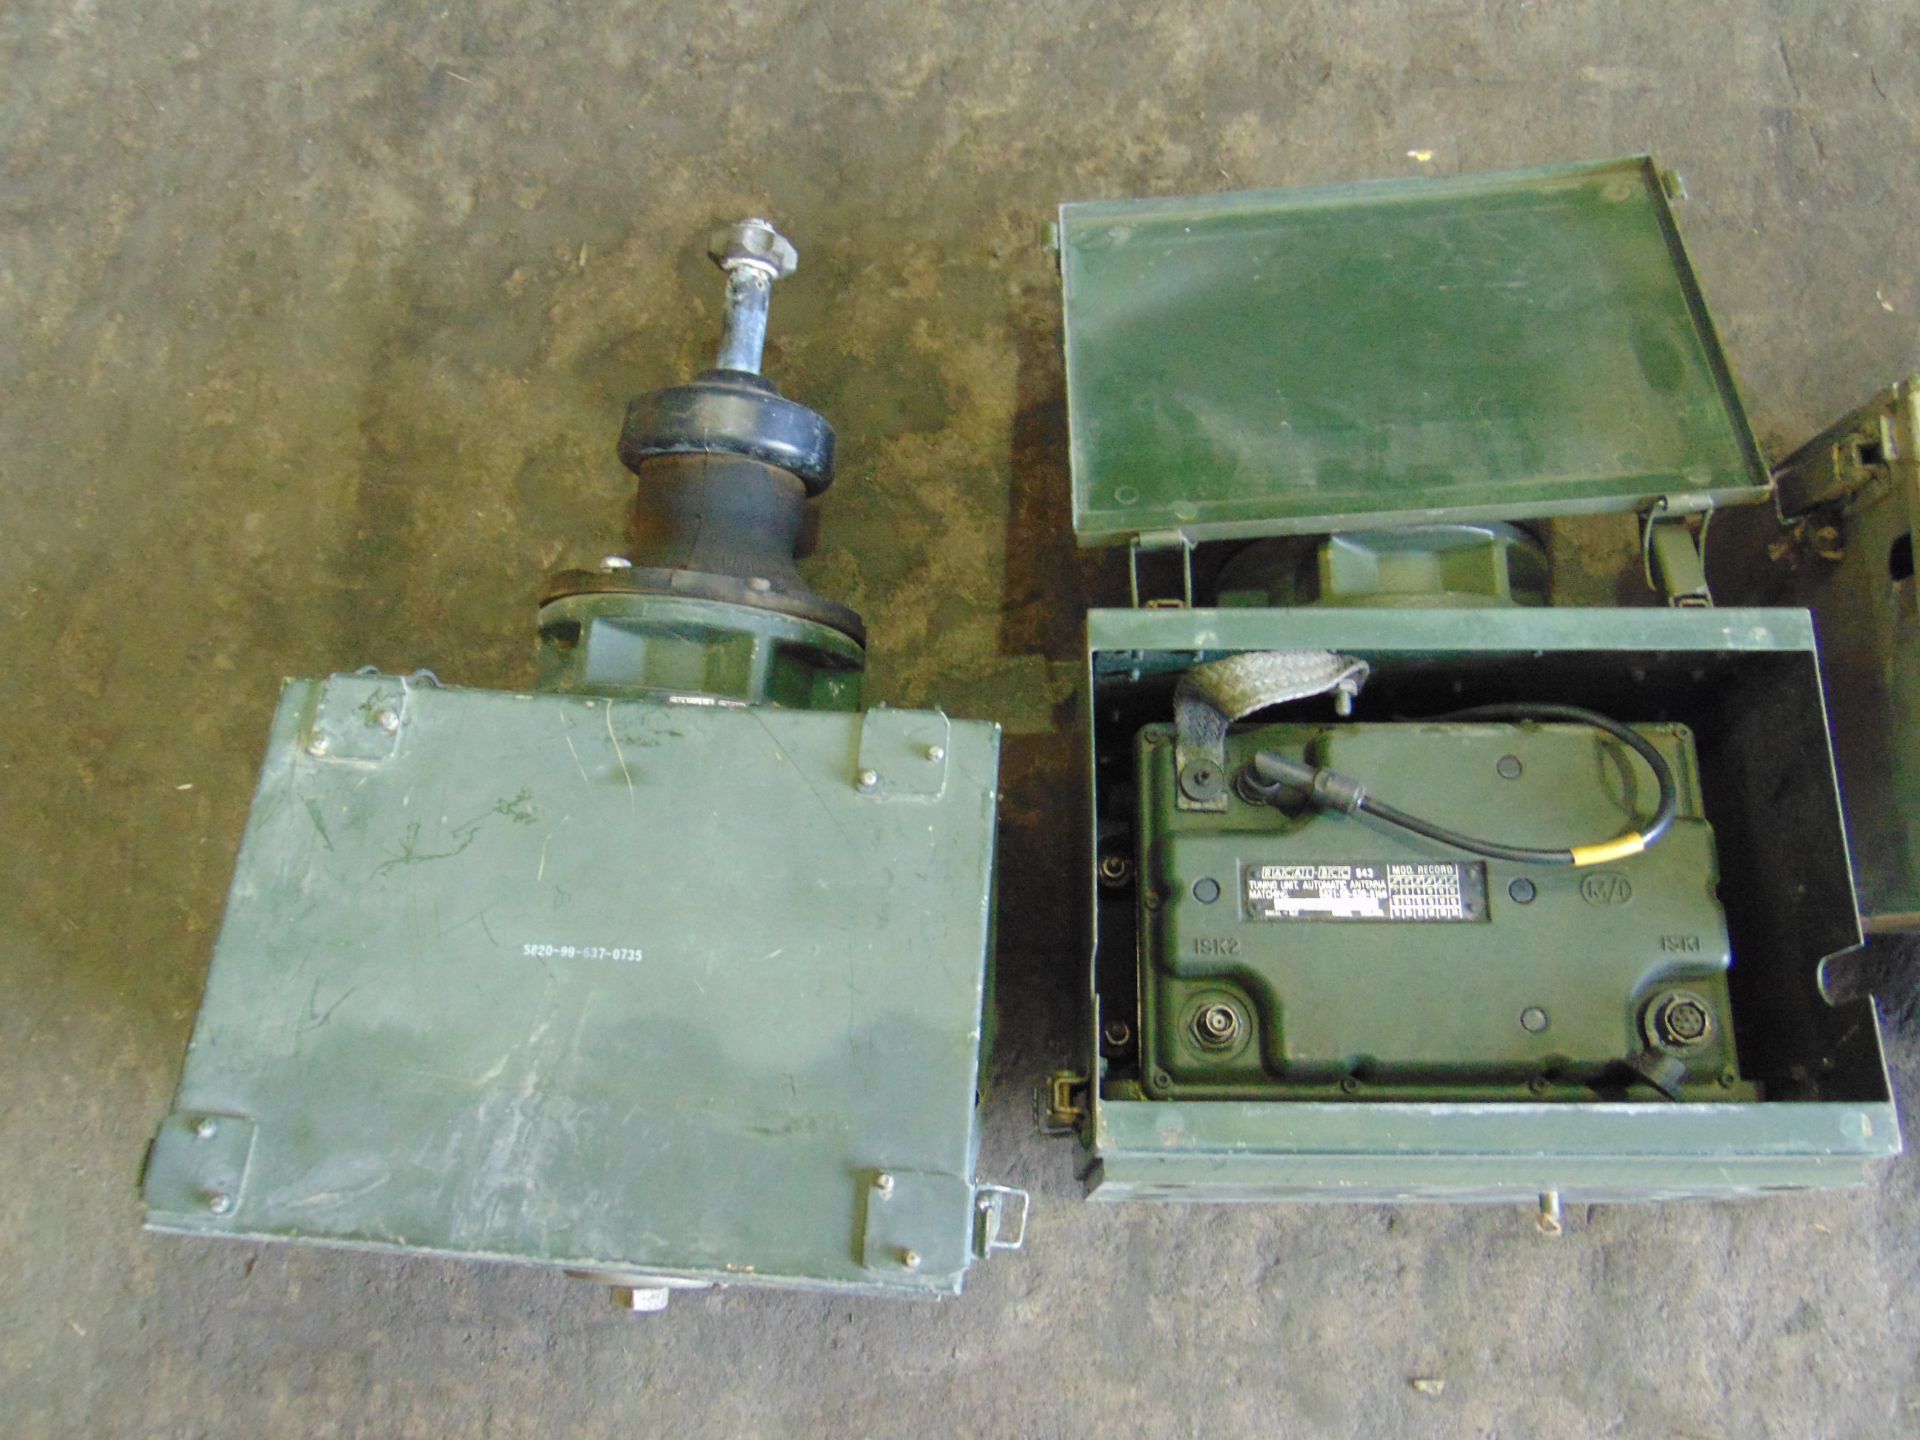 4X LAND-ROVER WING BOXES ETC - Image 3 of 4